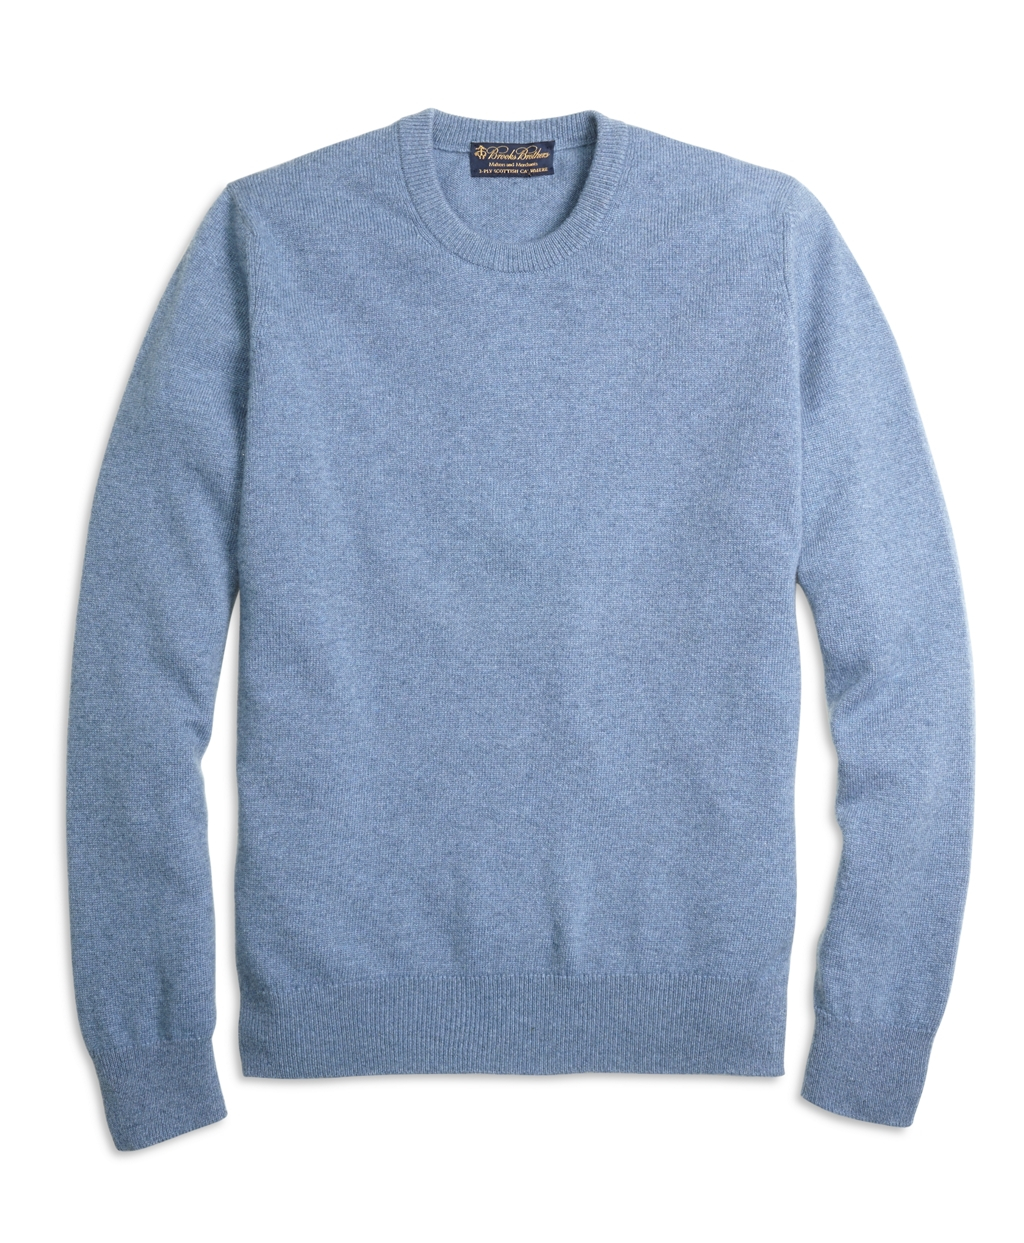 Brooks Brothers Cashmere Crewneck Sweater in Blue for Men - Lyst